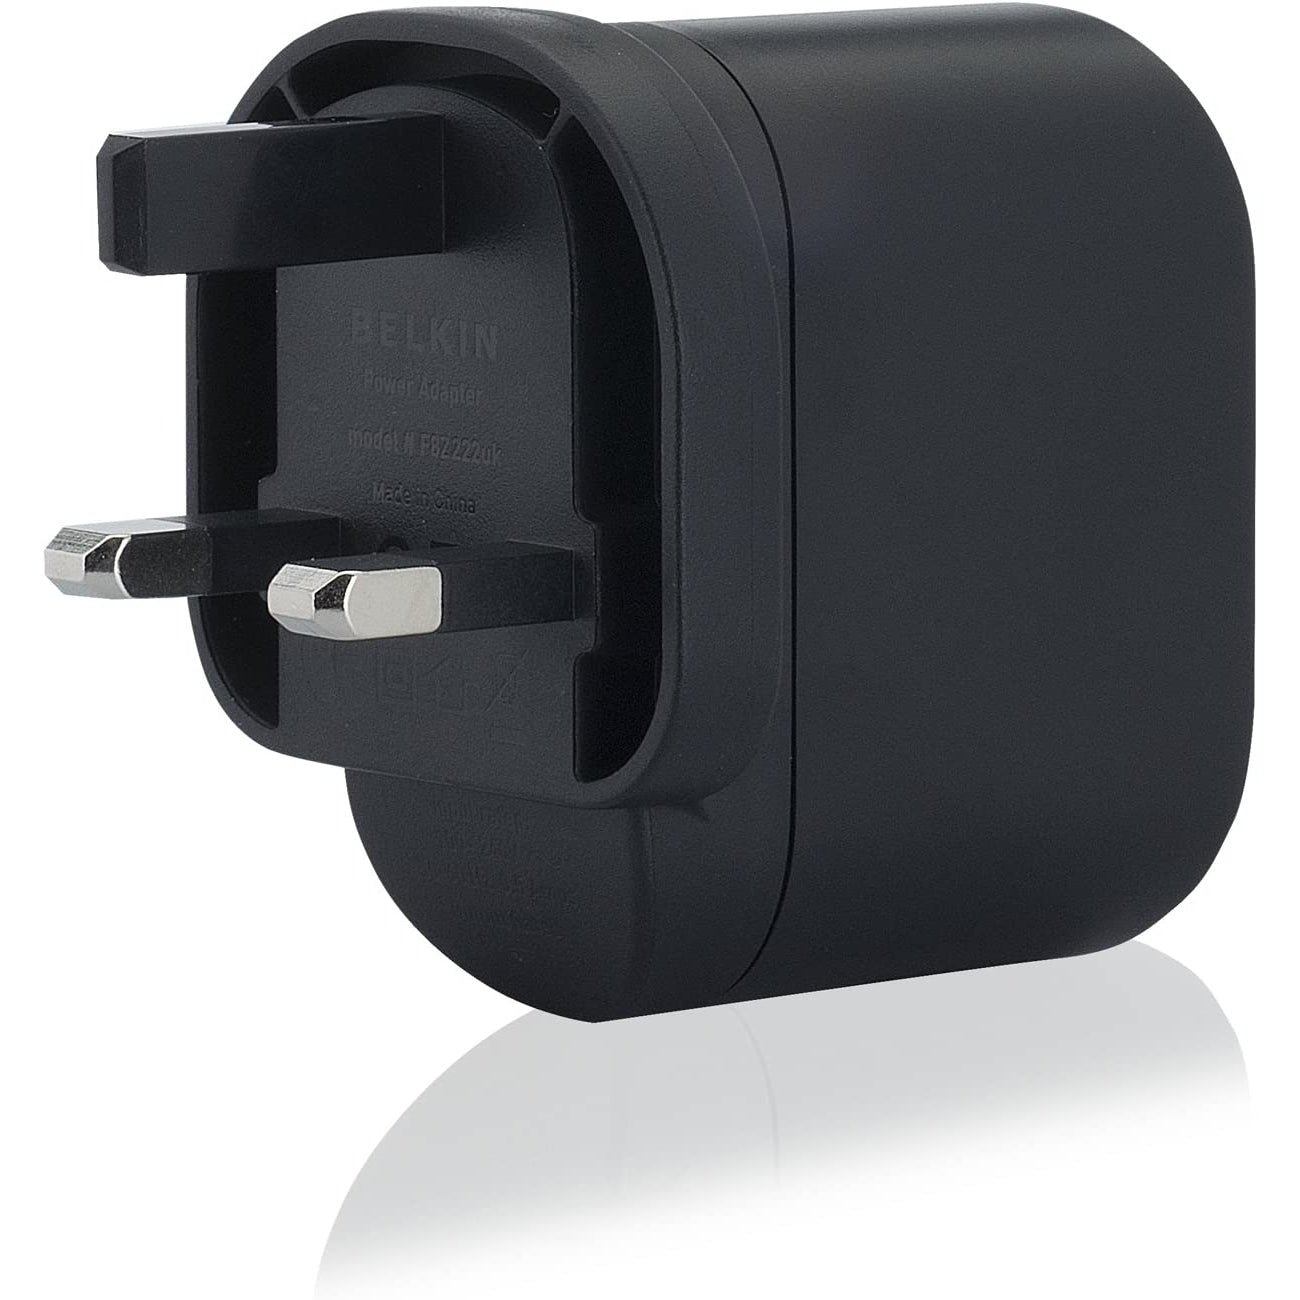 Belkin Universal USB Wall Charger for iPhone and iPod